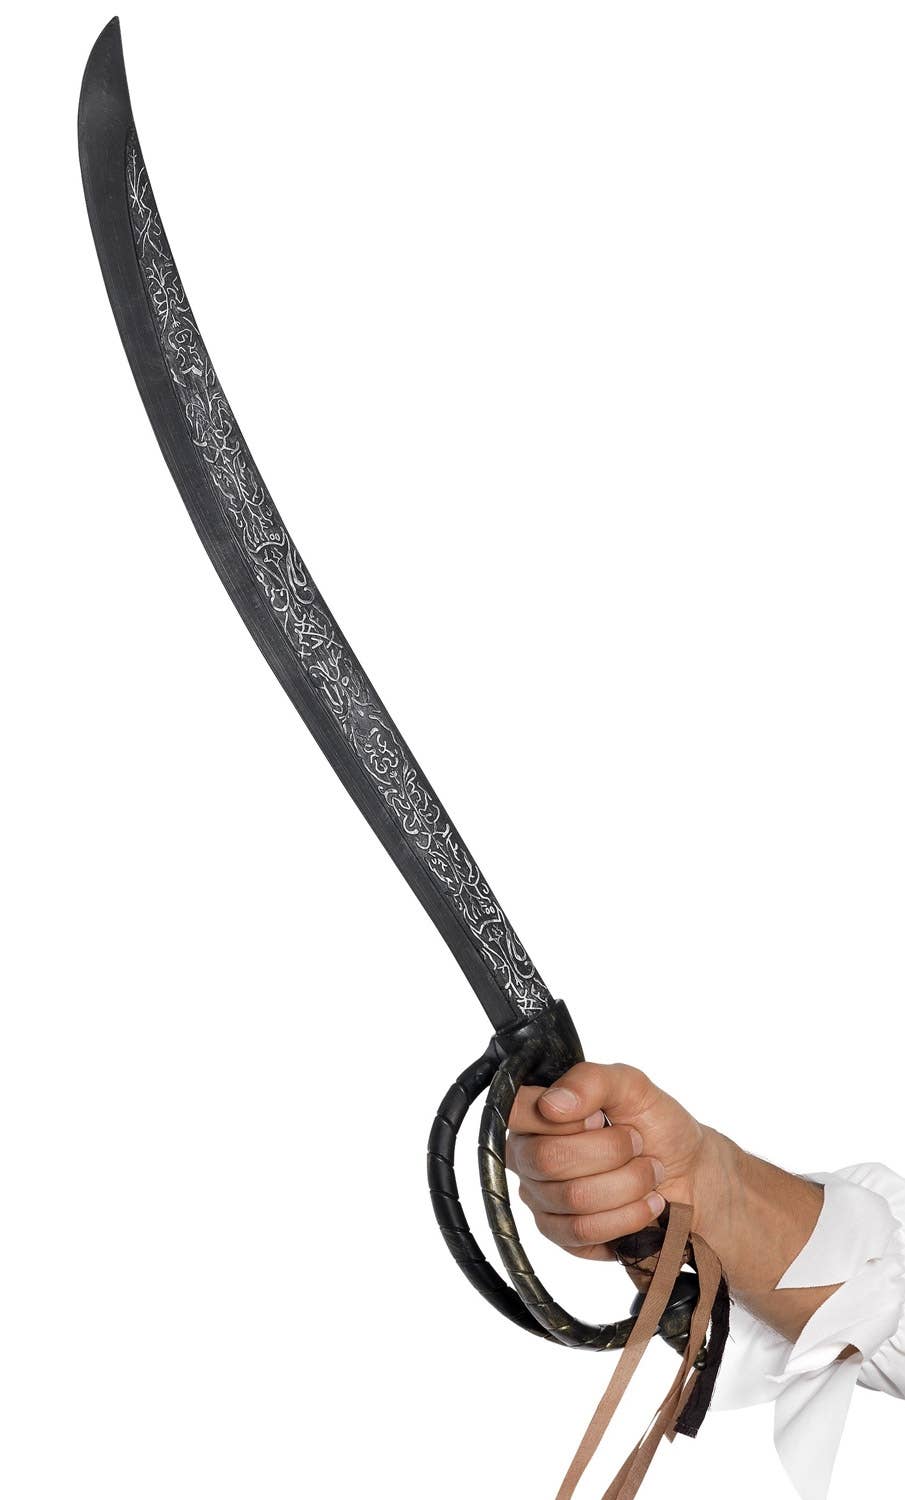 Deluxe Novelty Pirate Sword Cutlass Costume Accessory